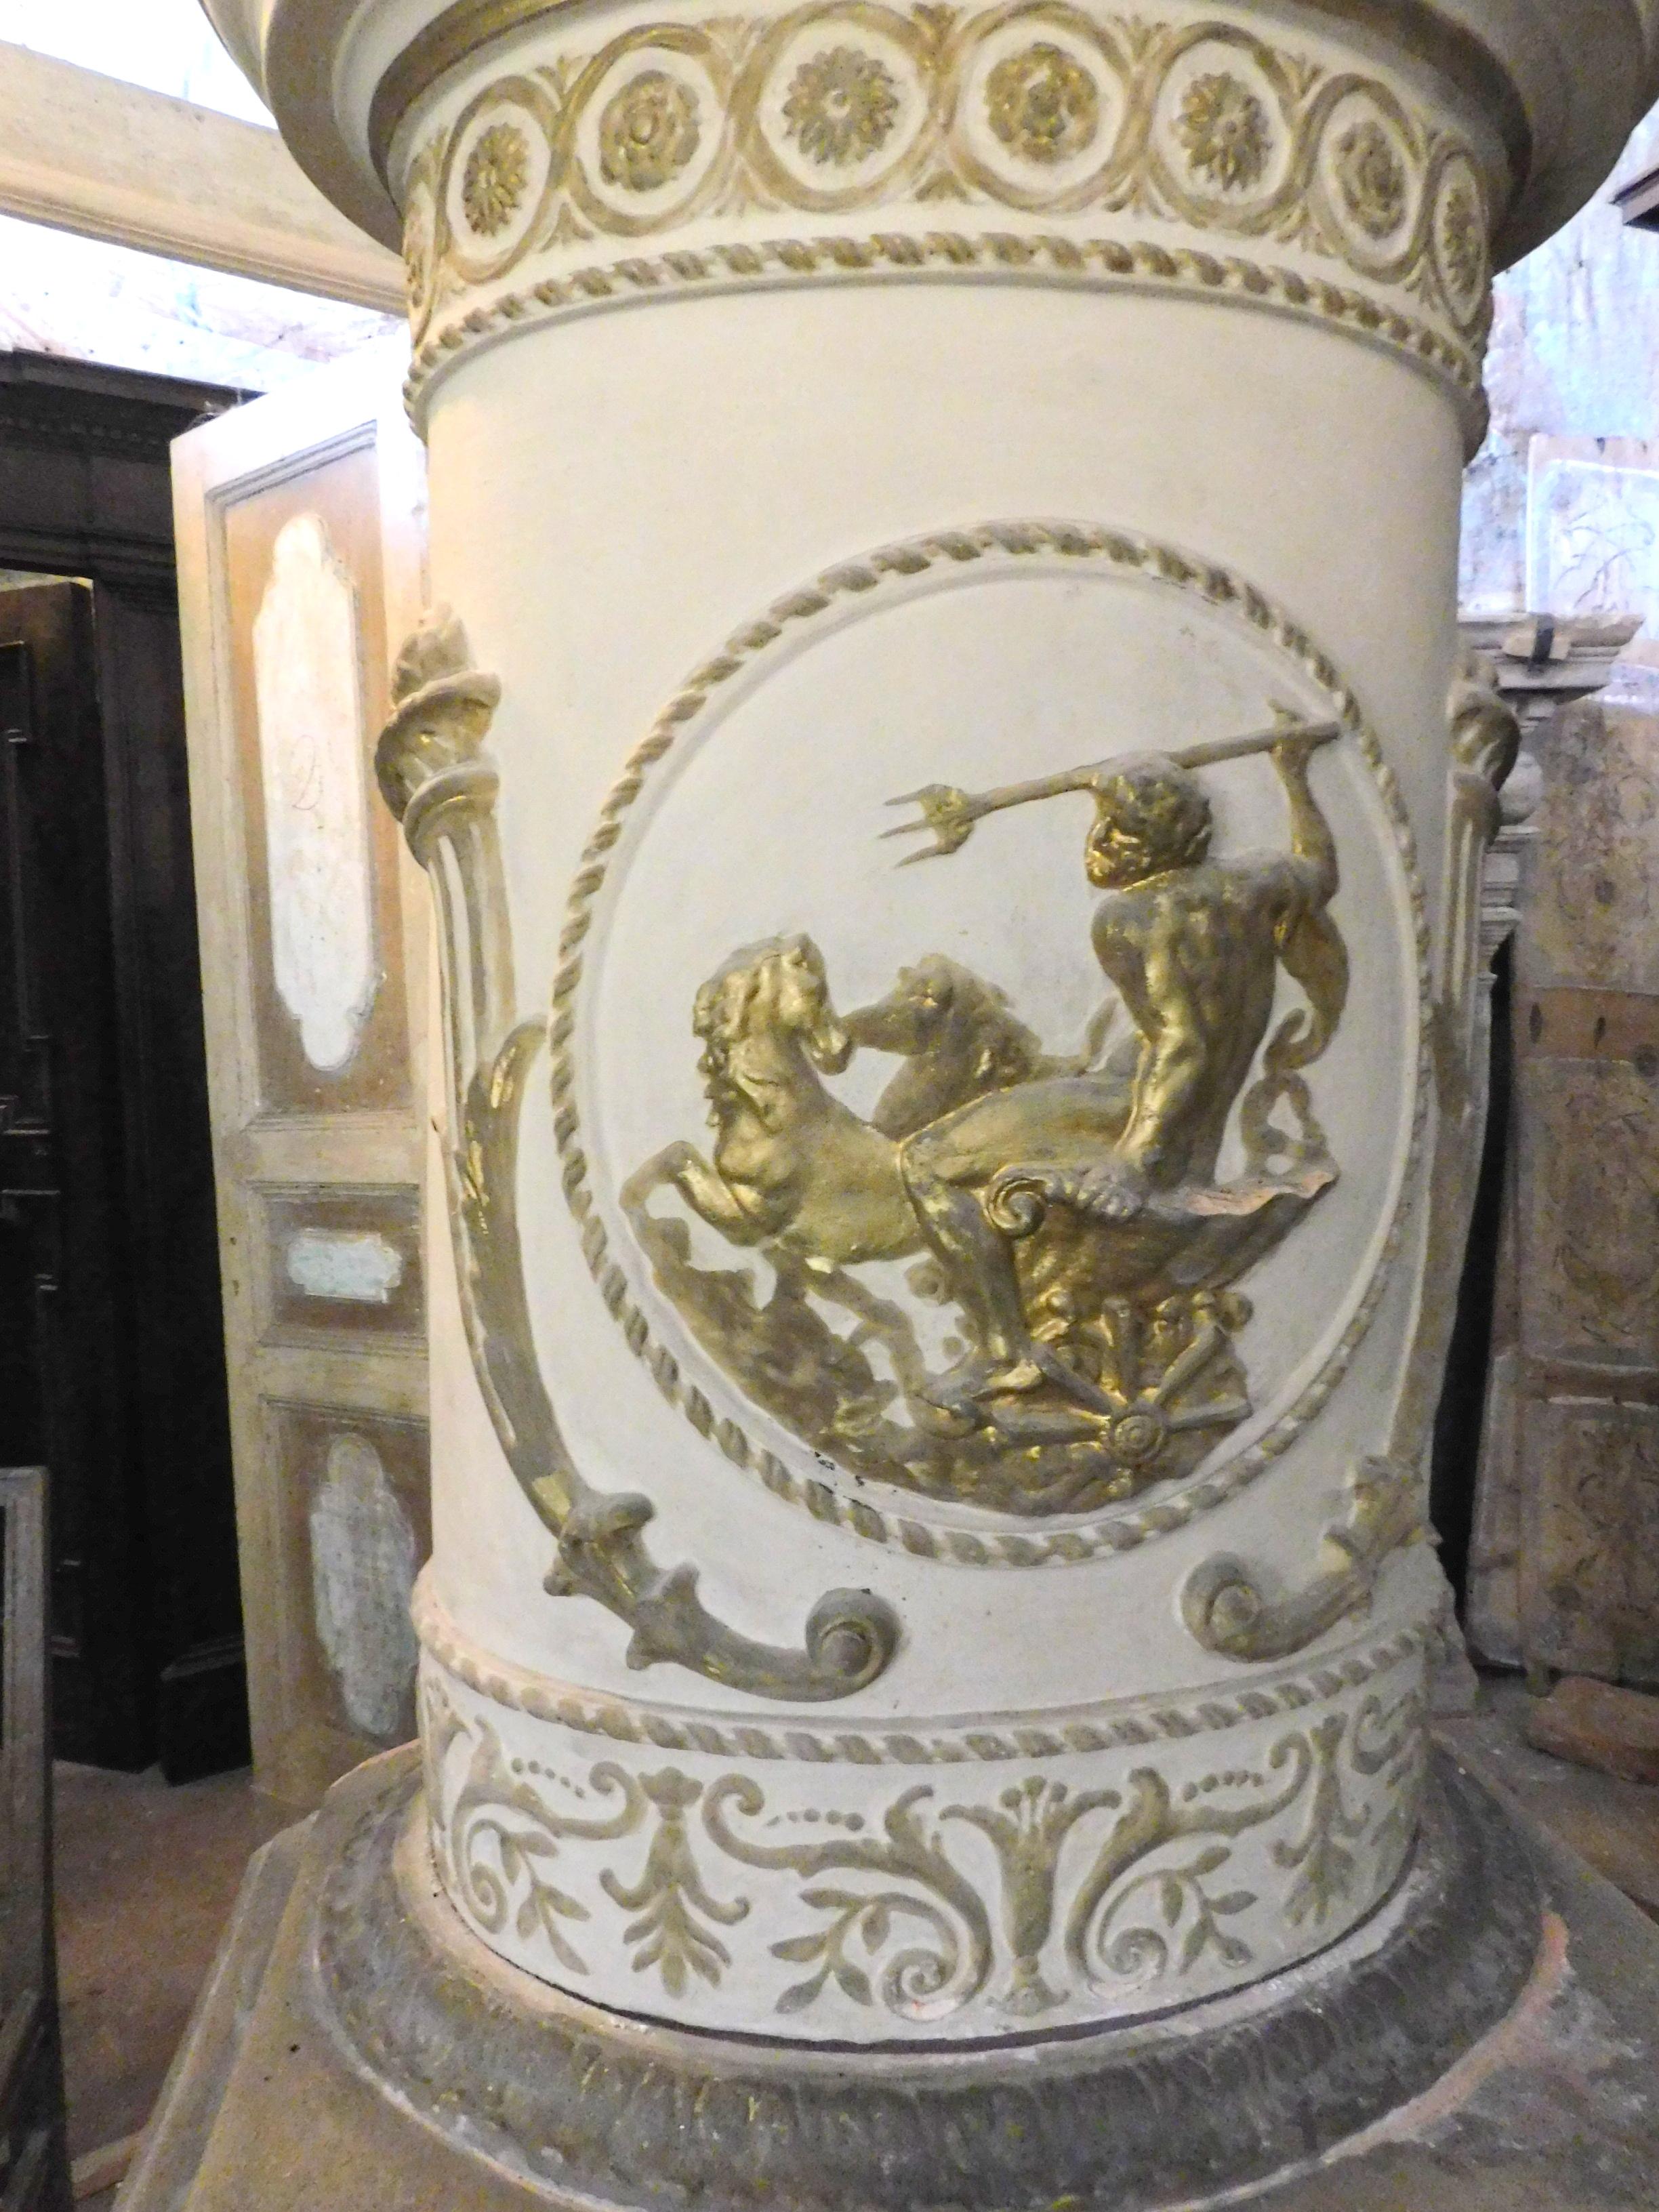 Italian Antique Stove Ceramic White and Gold, Carved Flue, Late 1700 Italy